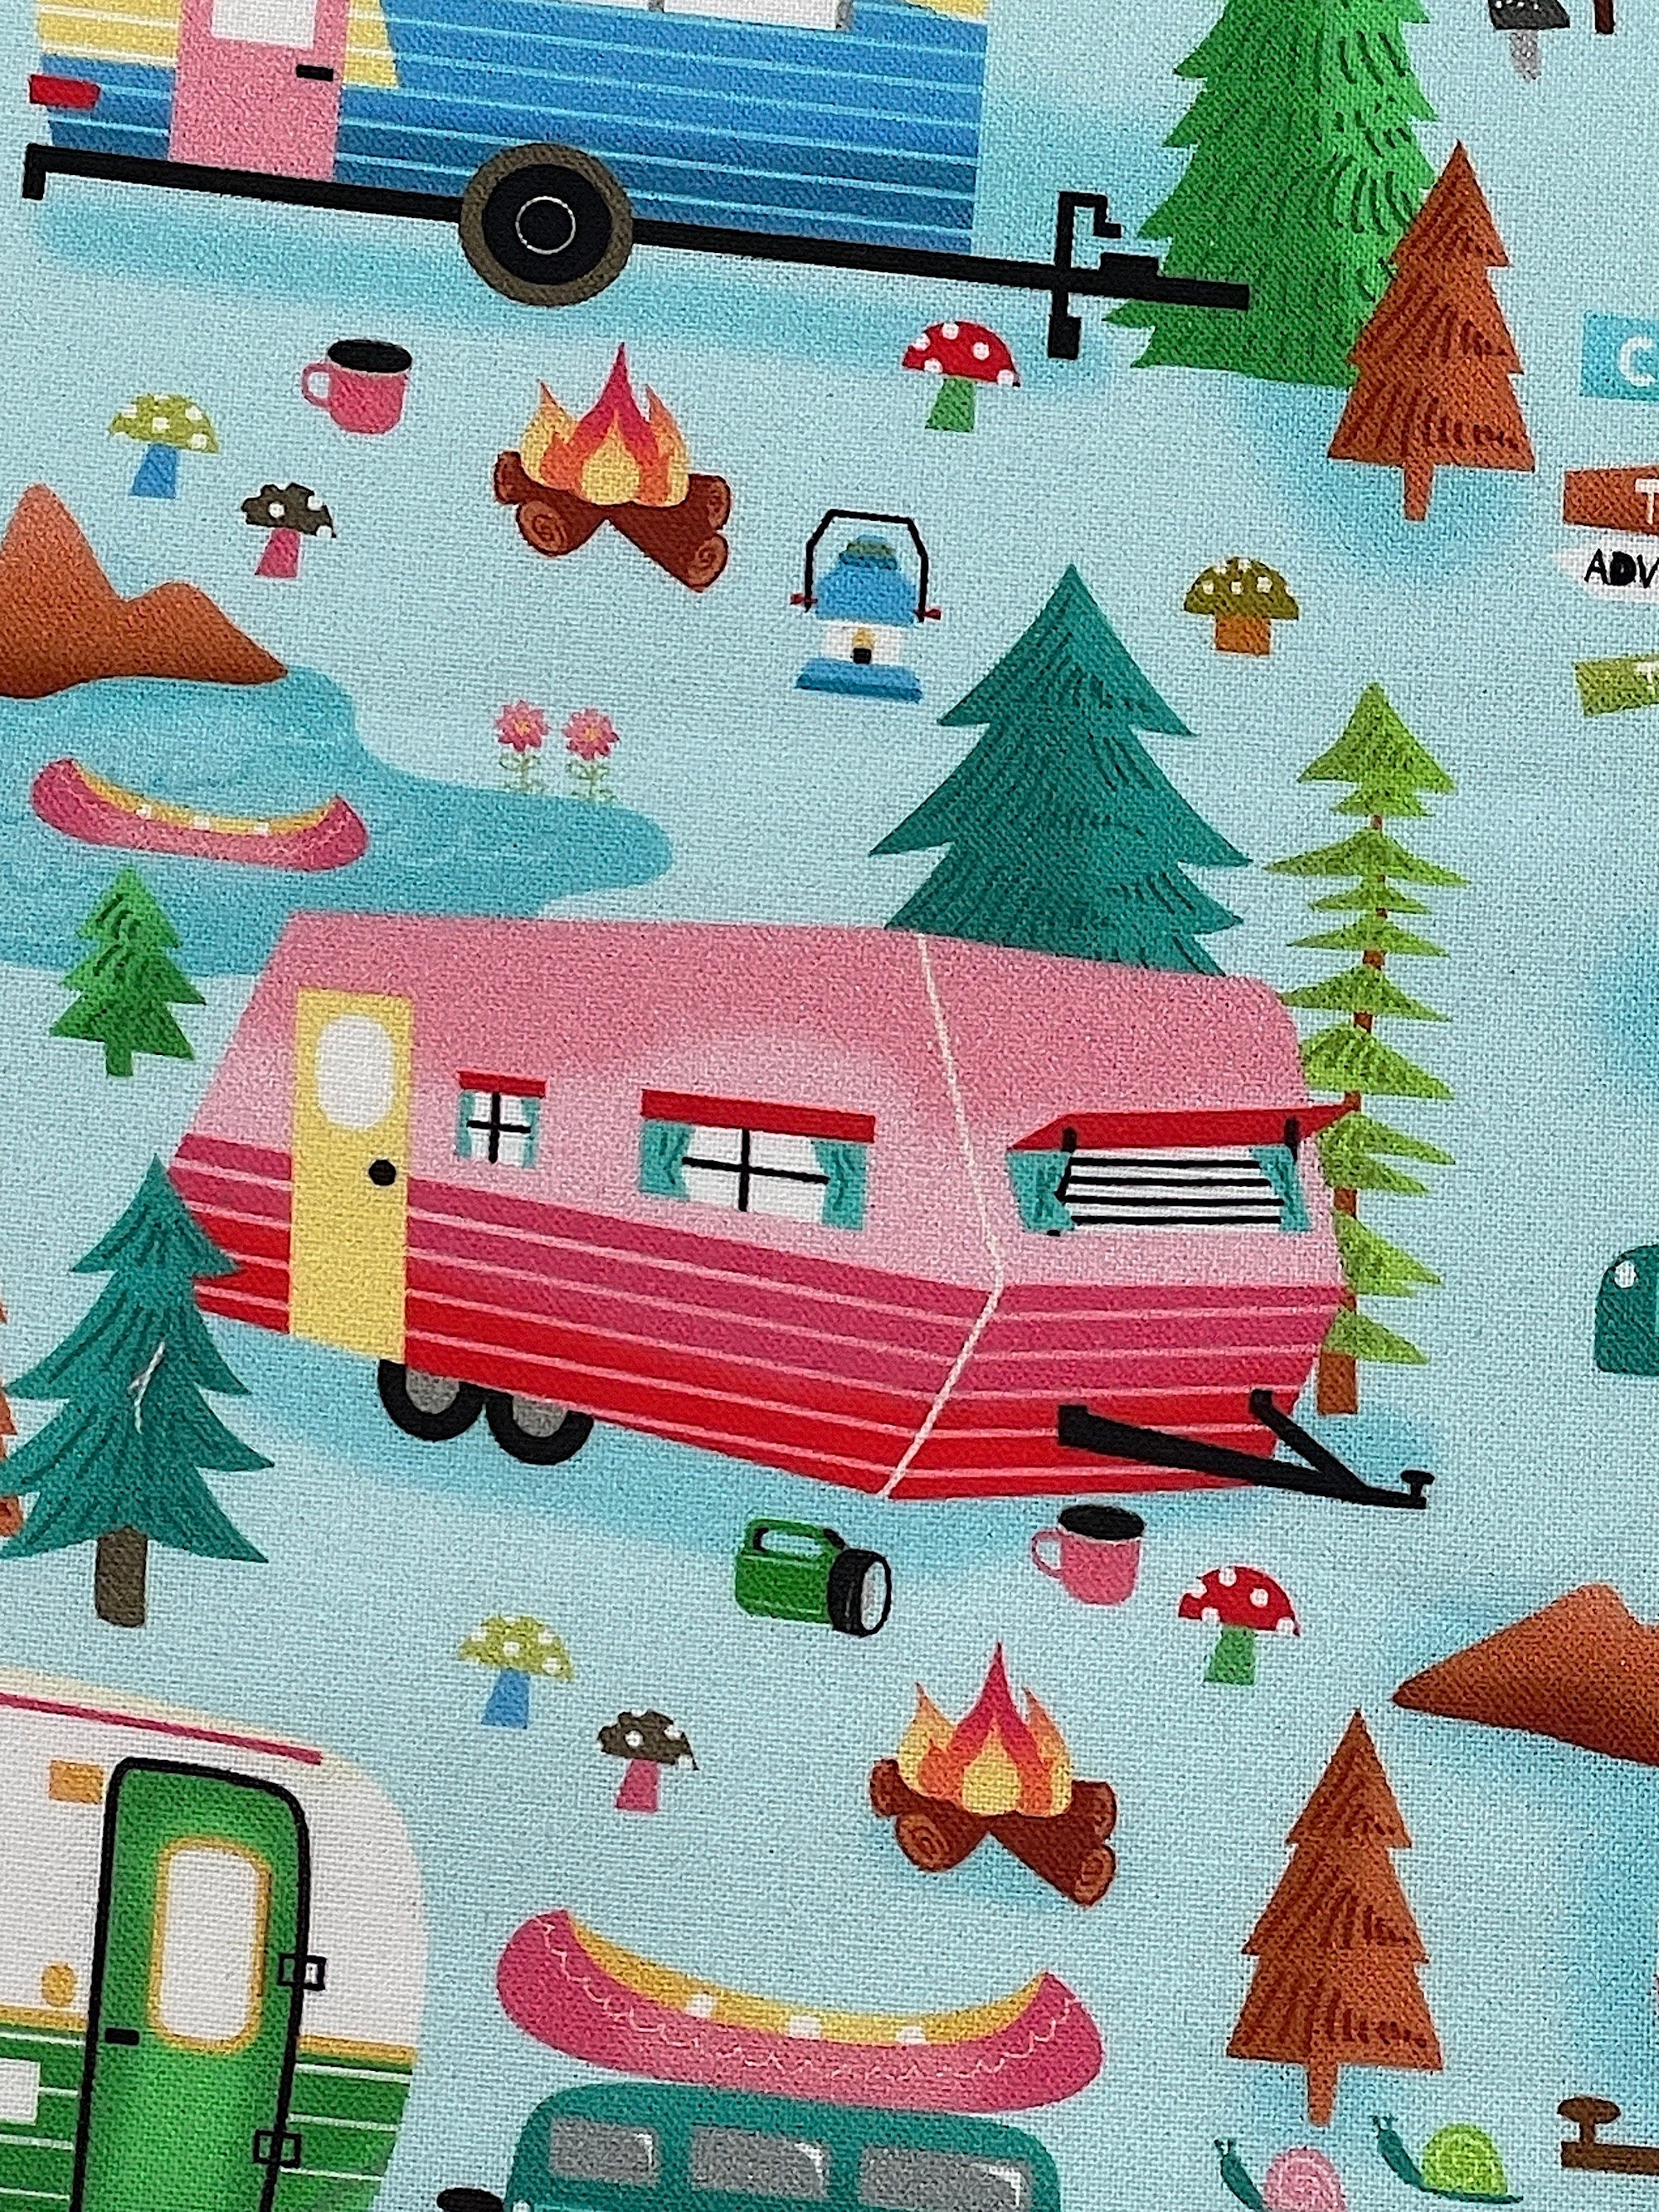 Close up of a pink and red travel trailer, trees, fire pit and more.